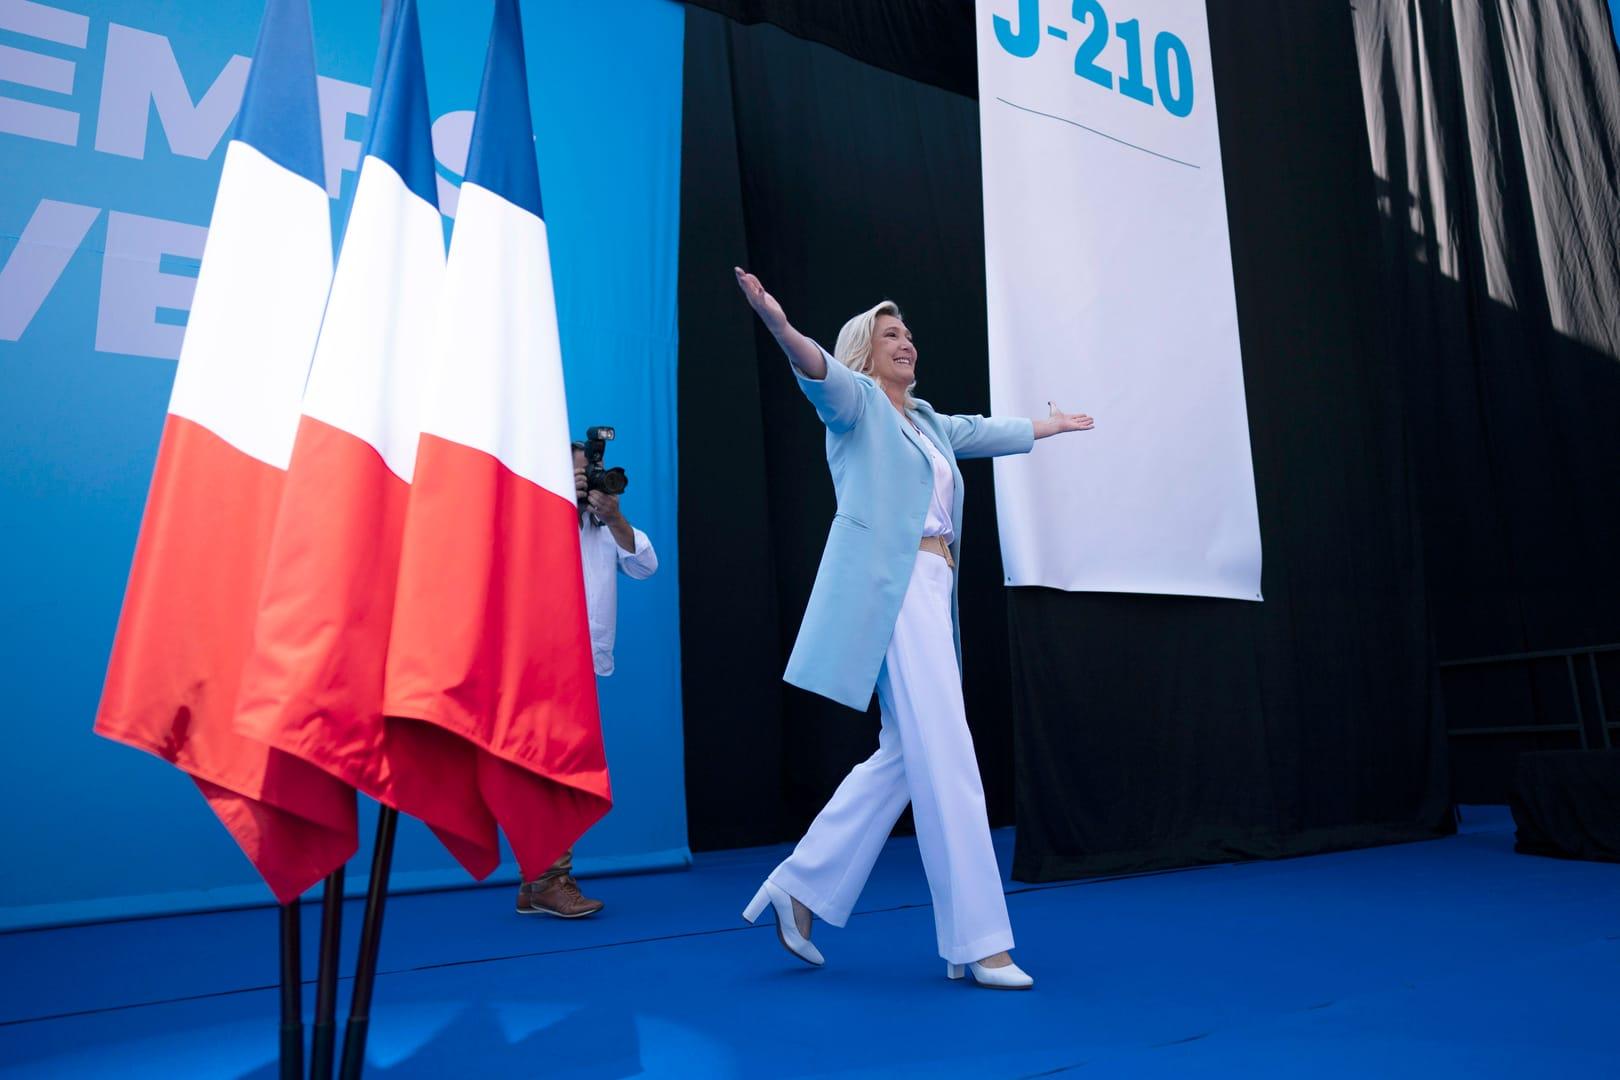 French far-right leader Le Pen softens image for election